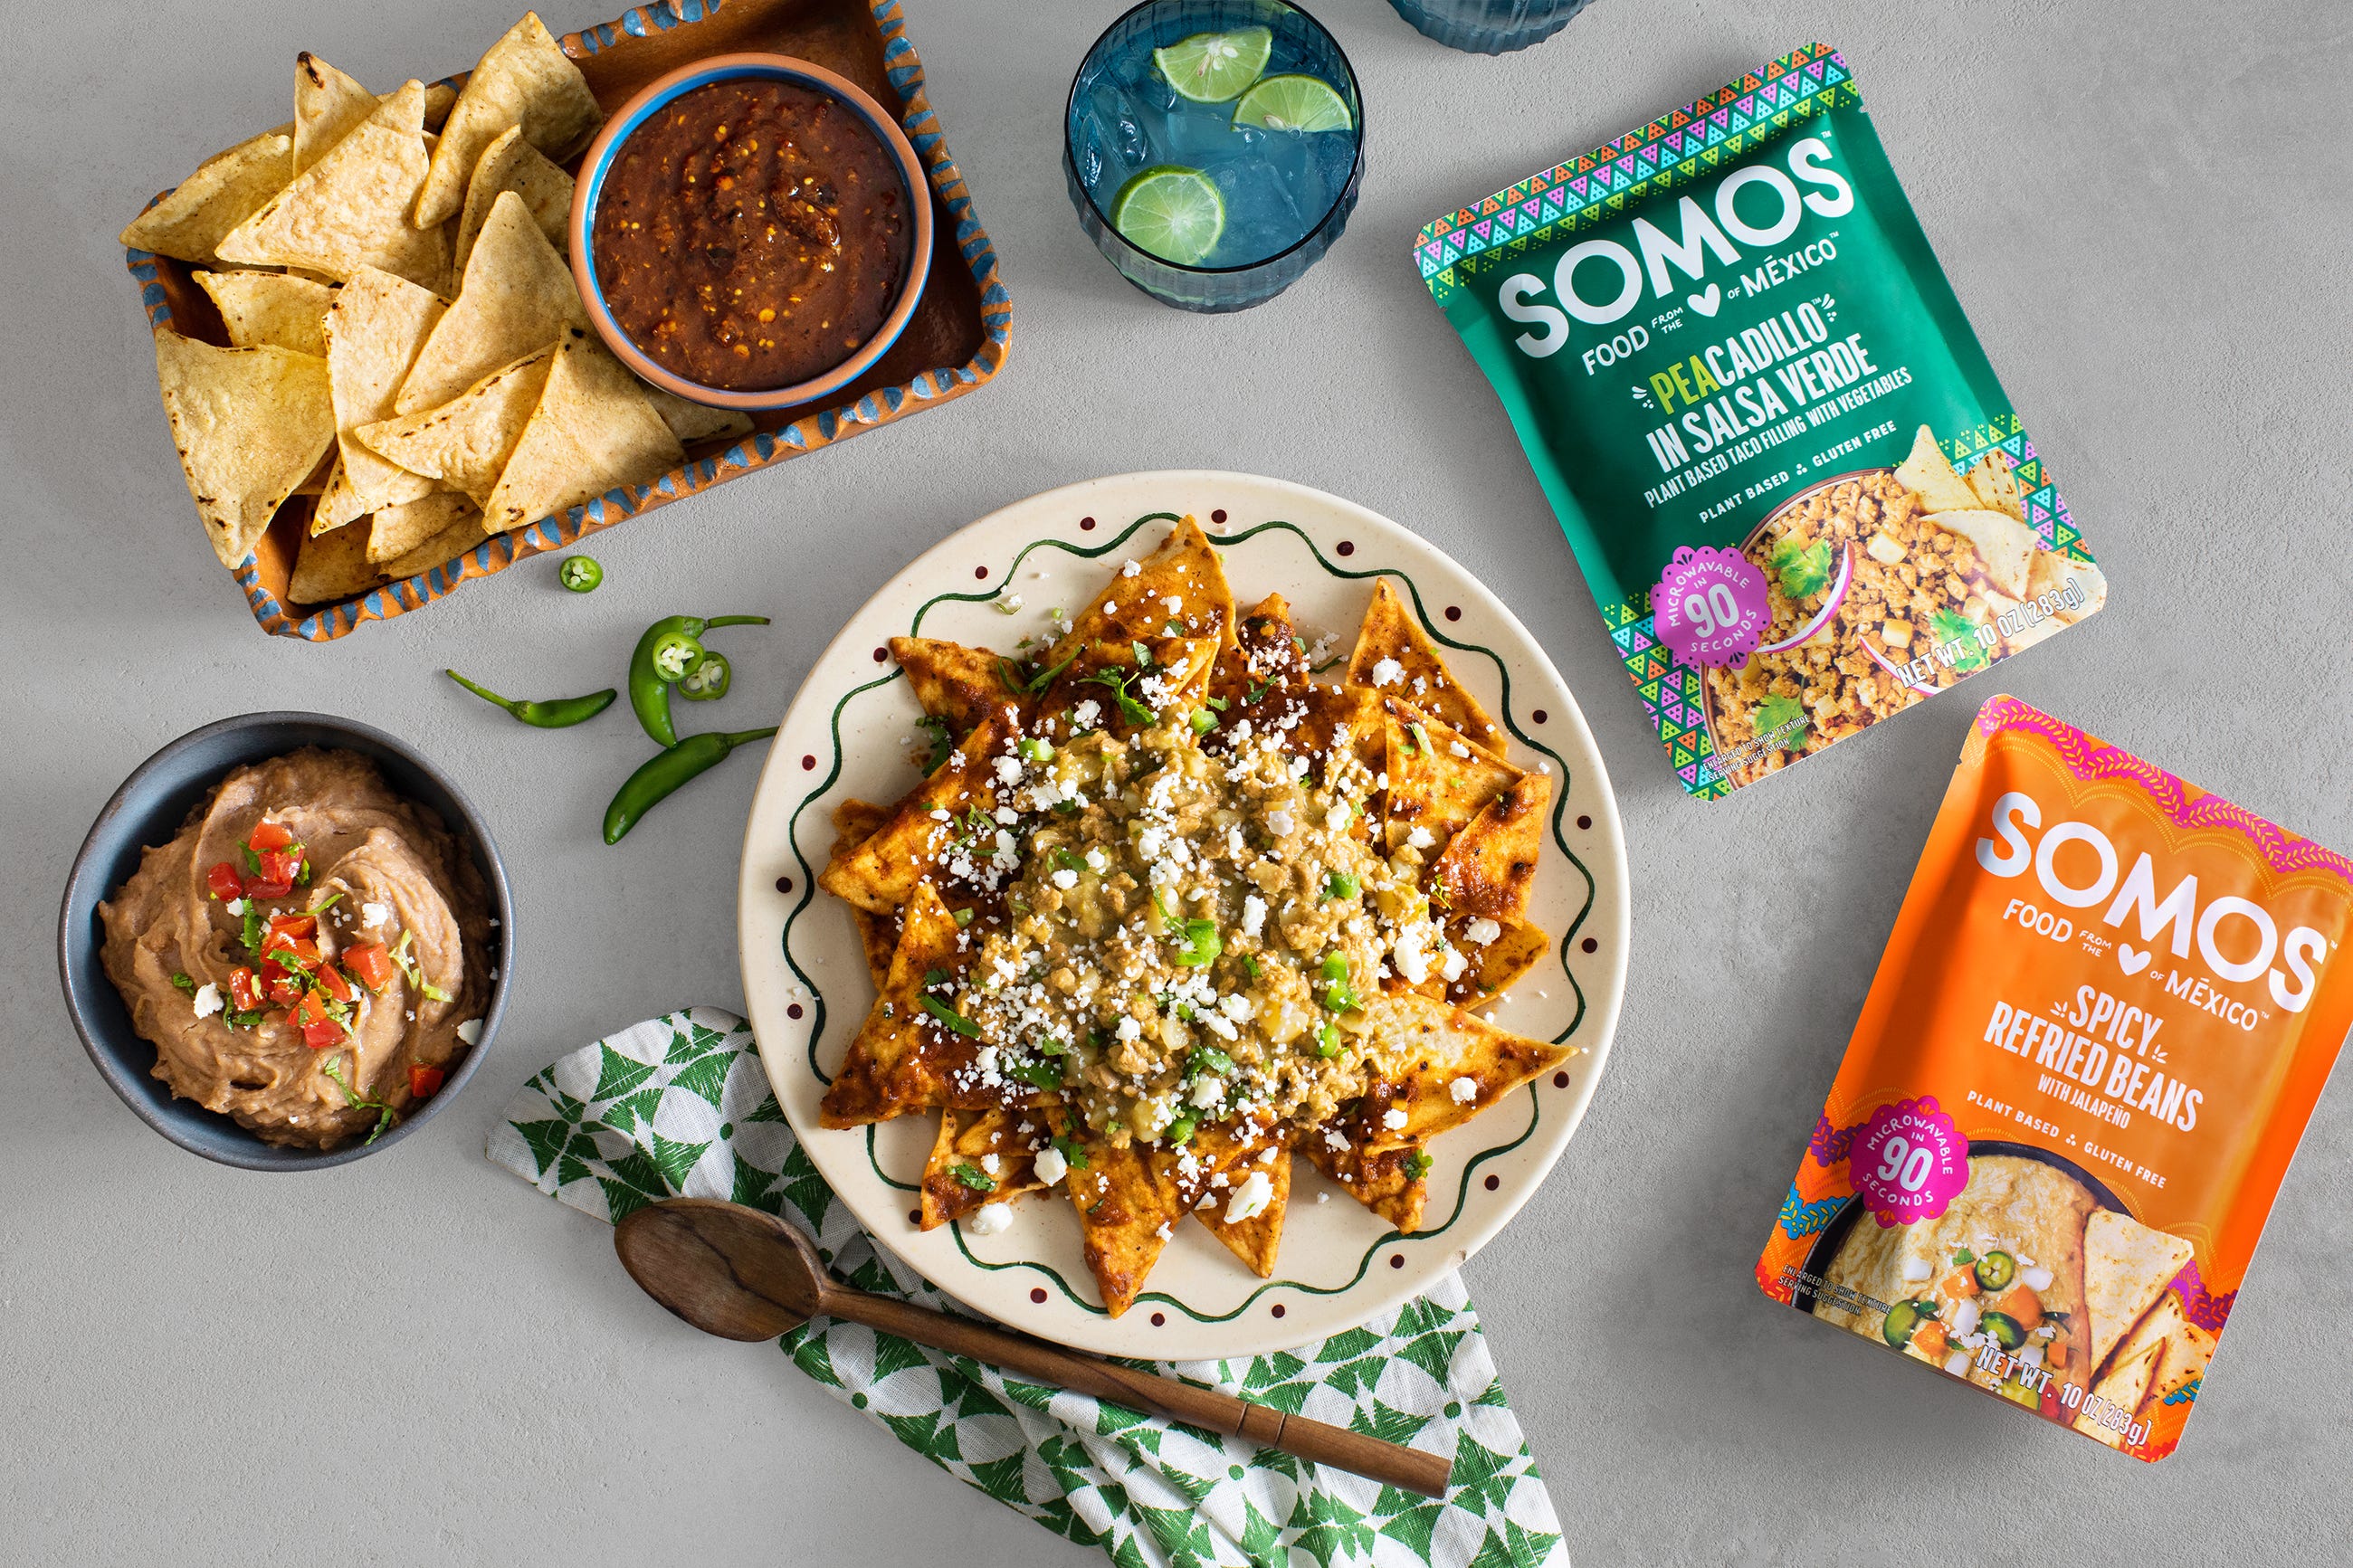 You Can Make the Perfect Burrito Bowl in 5 Minutes With Somos